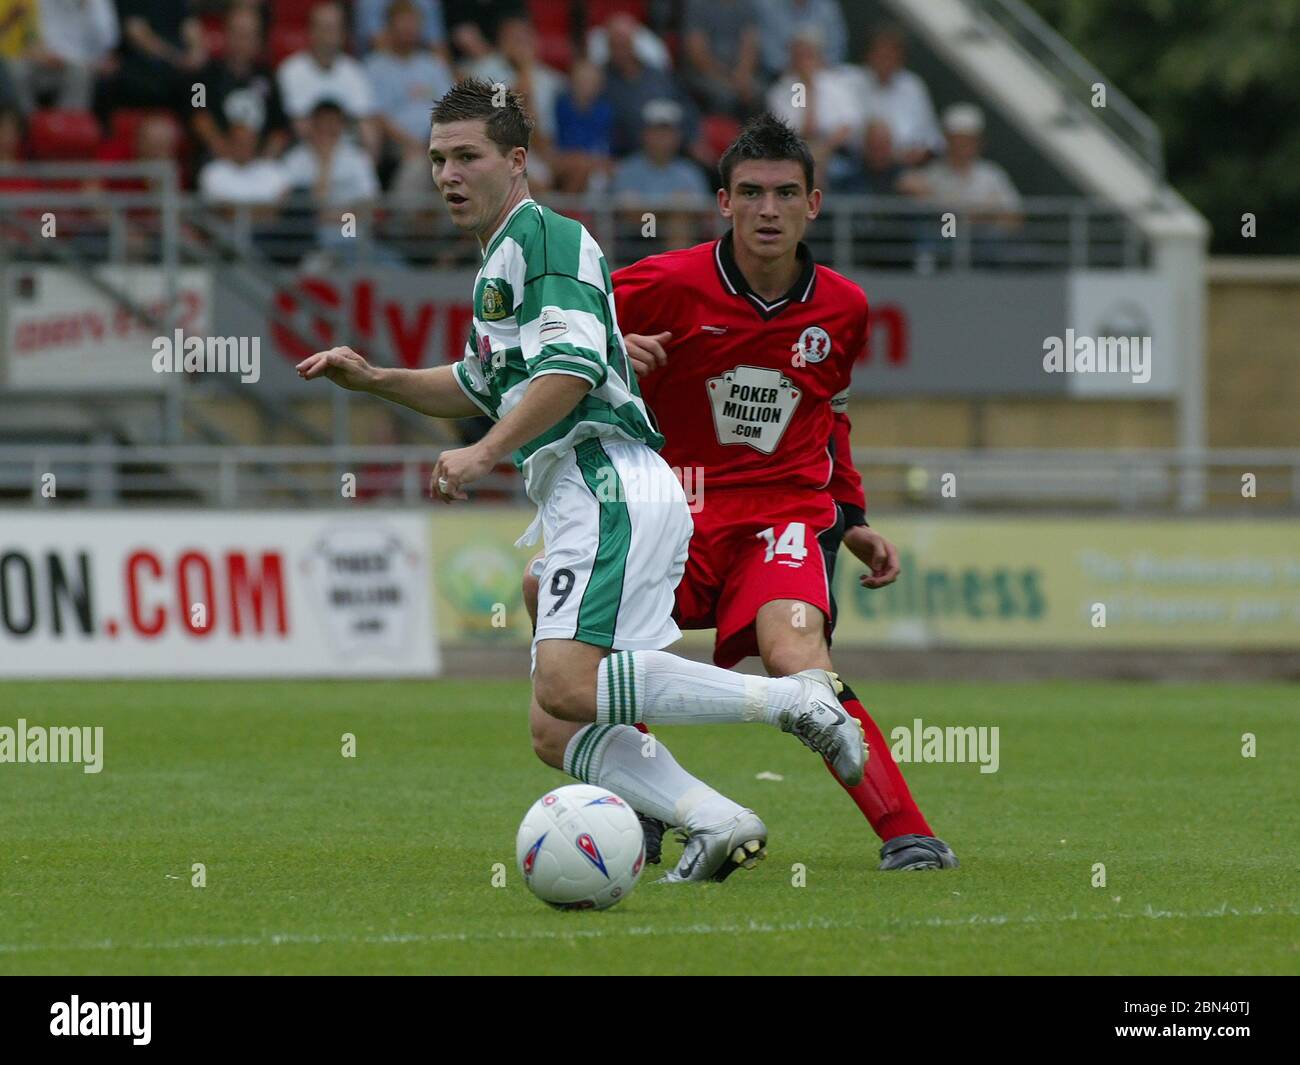 LONDON, UK. AUGUST 23: Kevin Gall of Yeovil Town  during League Division 3 between Leyton Orient and Yeovil Town at Matchroom stadium, London on 23rd Stock Photo